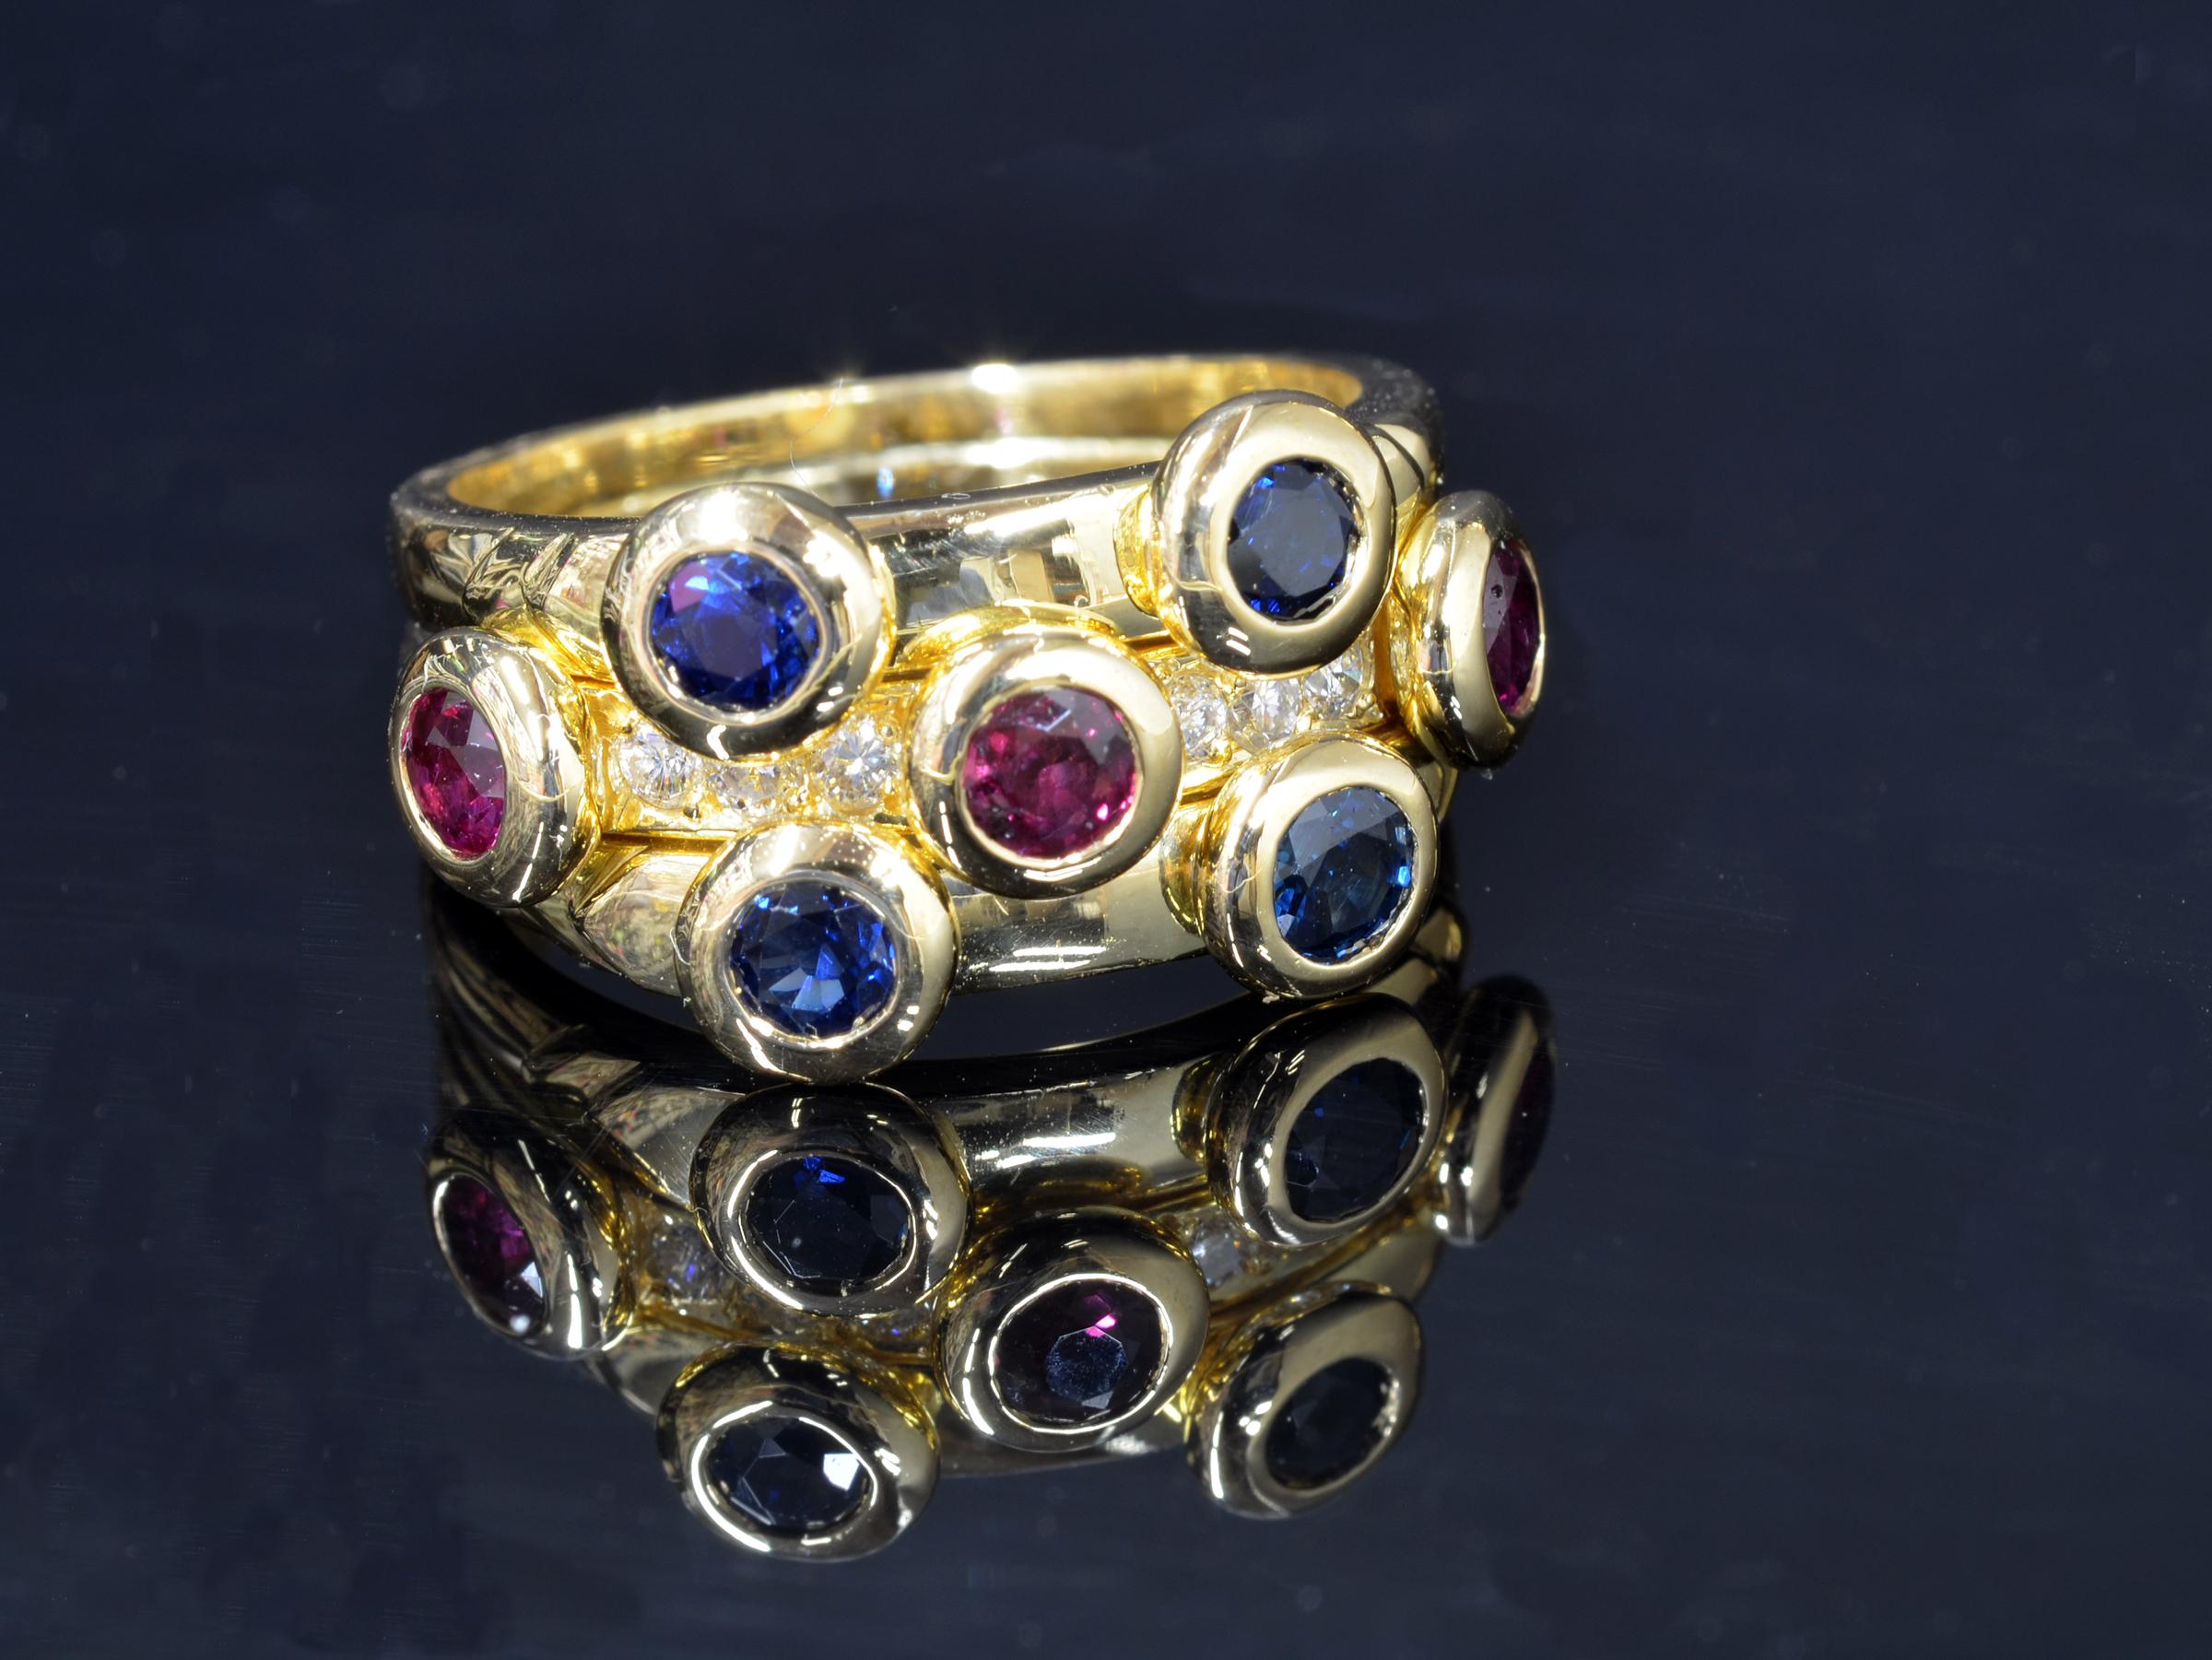 18 Karat Gold Sapphire, Ruby and Diamond Ring; Custom made 18 Kt. gold ring set with 6 Round brilliant cut Diamonds, 3 round Rubies and 4 round Sapphires, handcrafted in my studio in Maine.